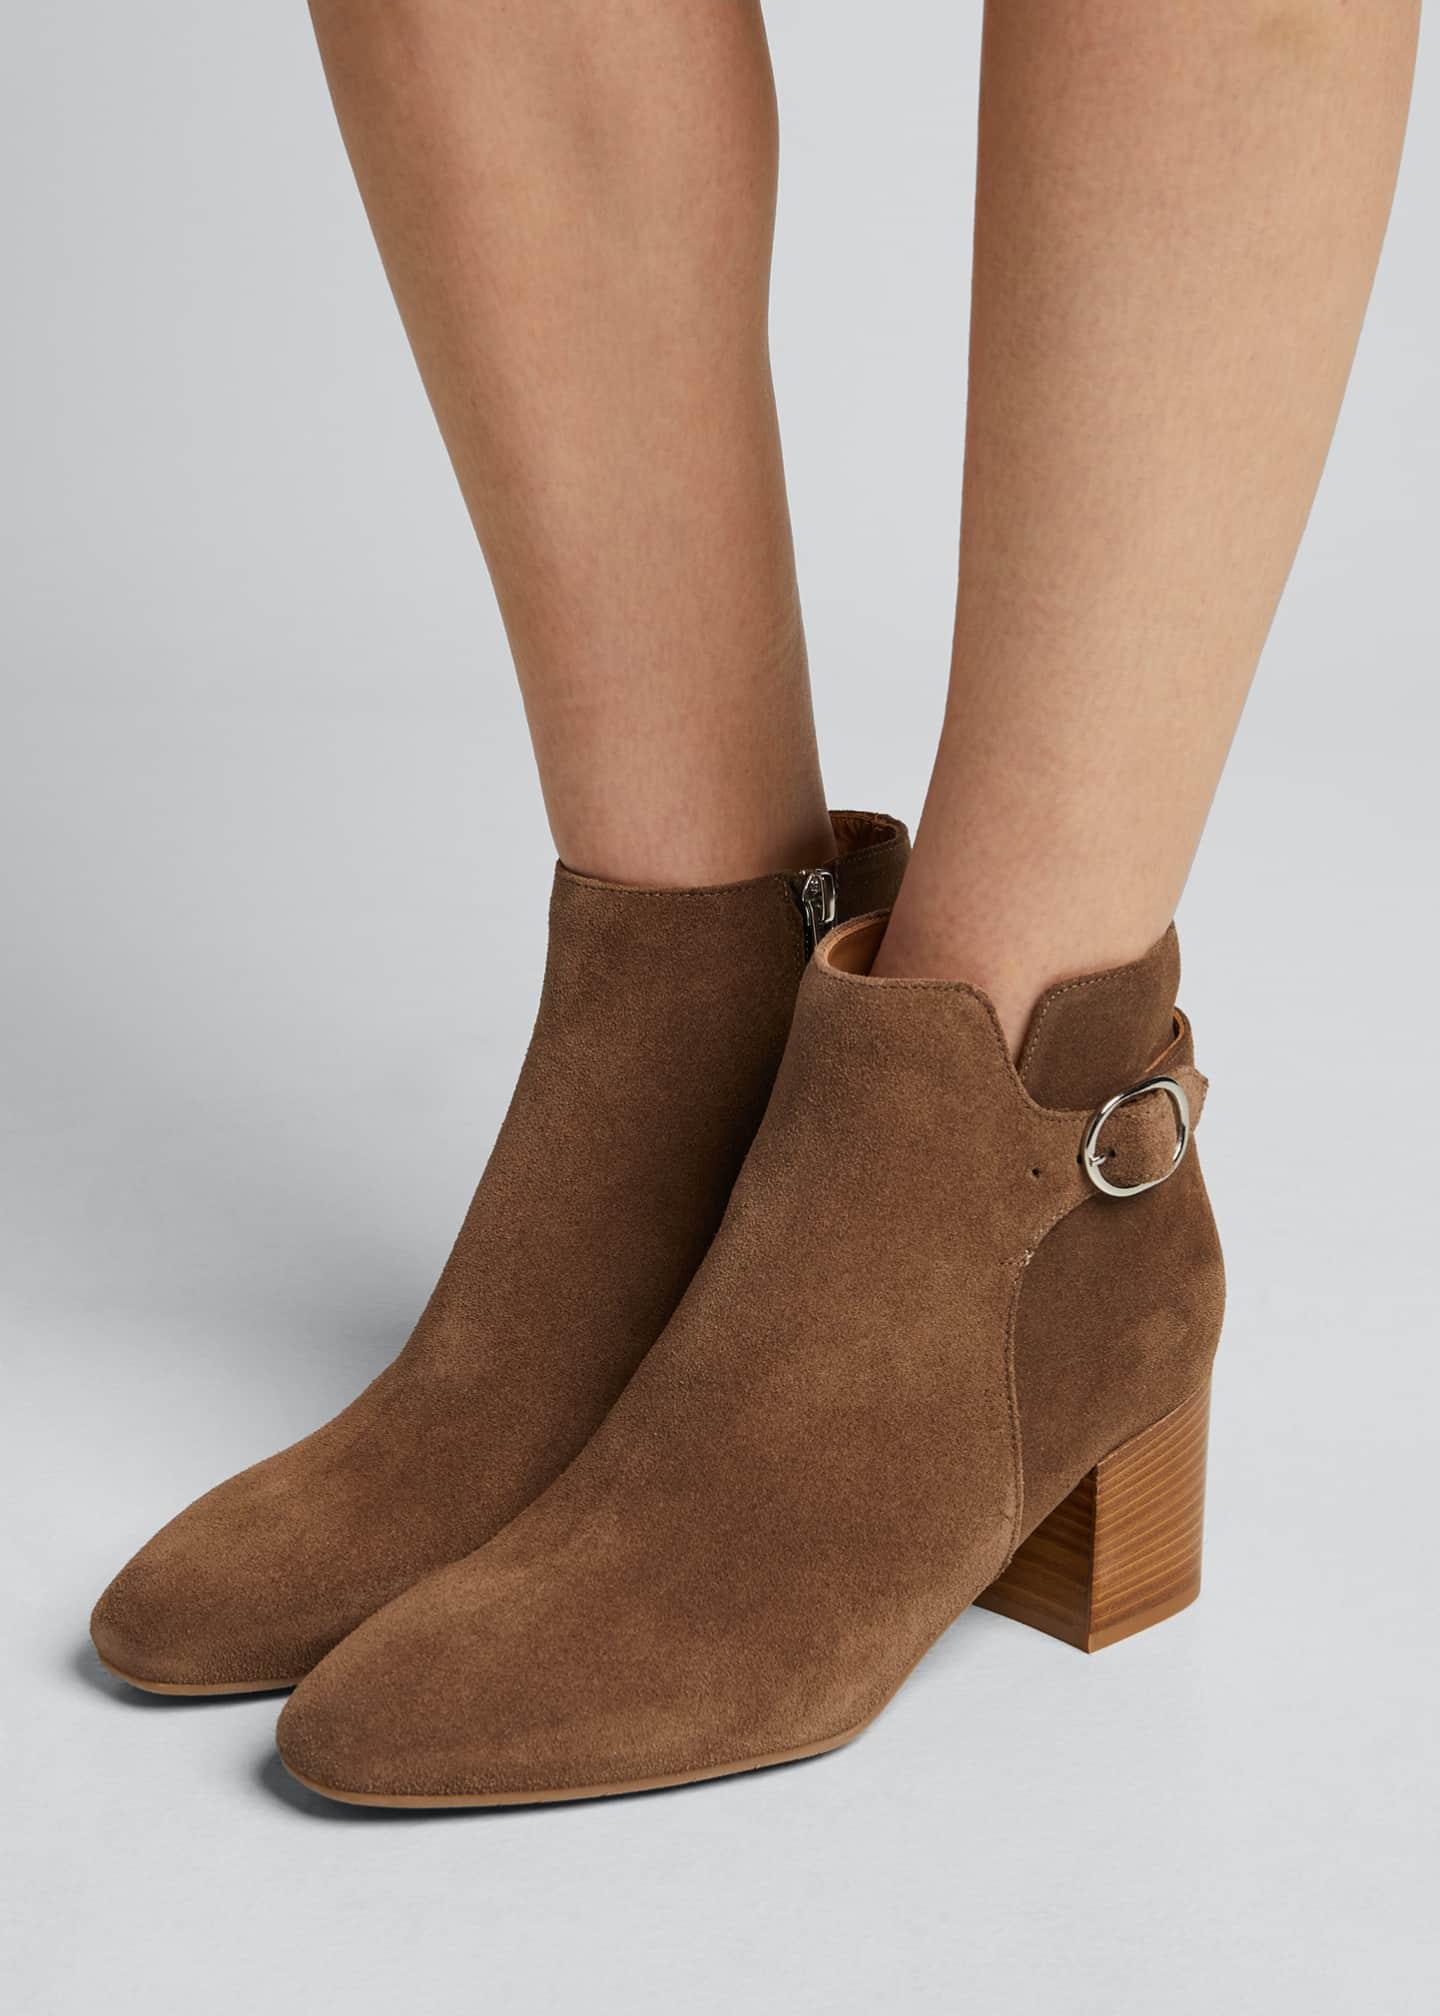 Aquatalia Tacey Suede Buckle Ankle Booties in Beige (Natural) - Lyst